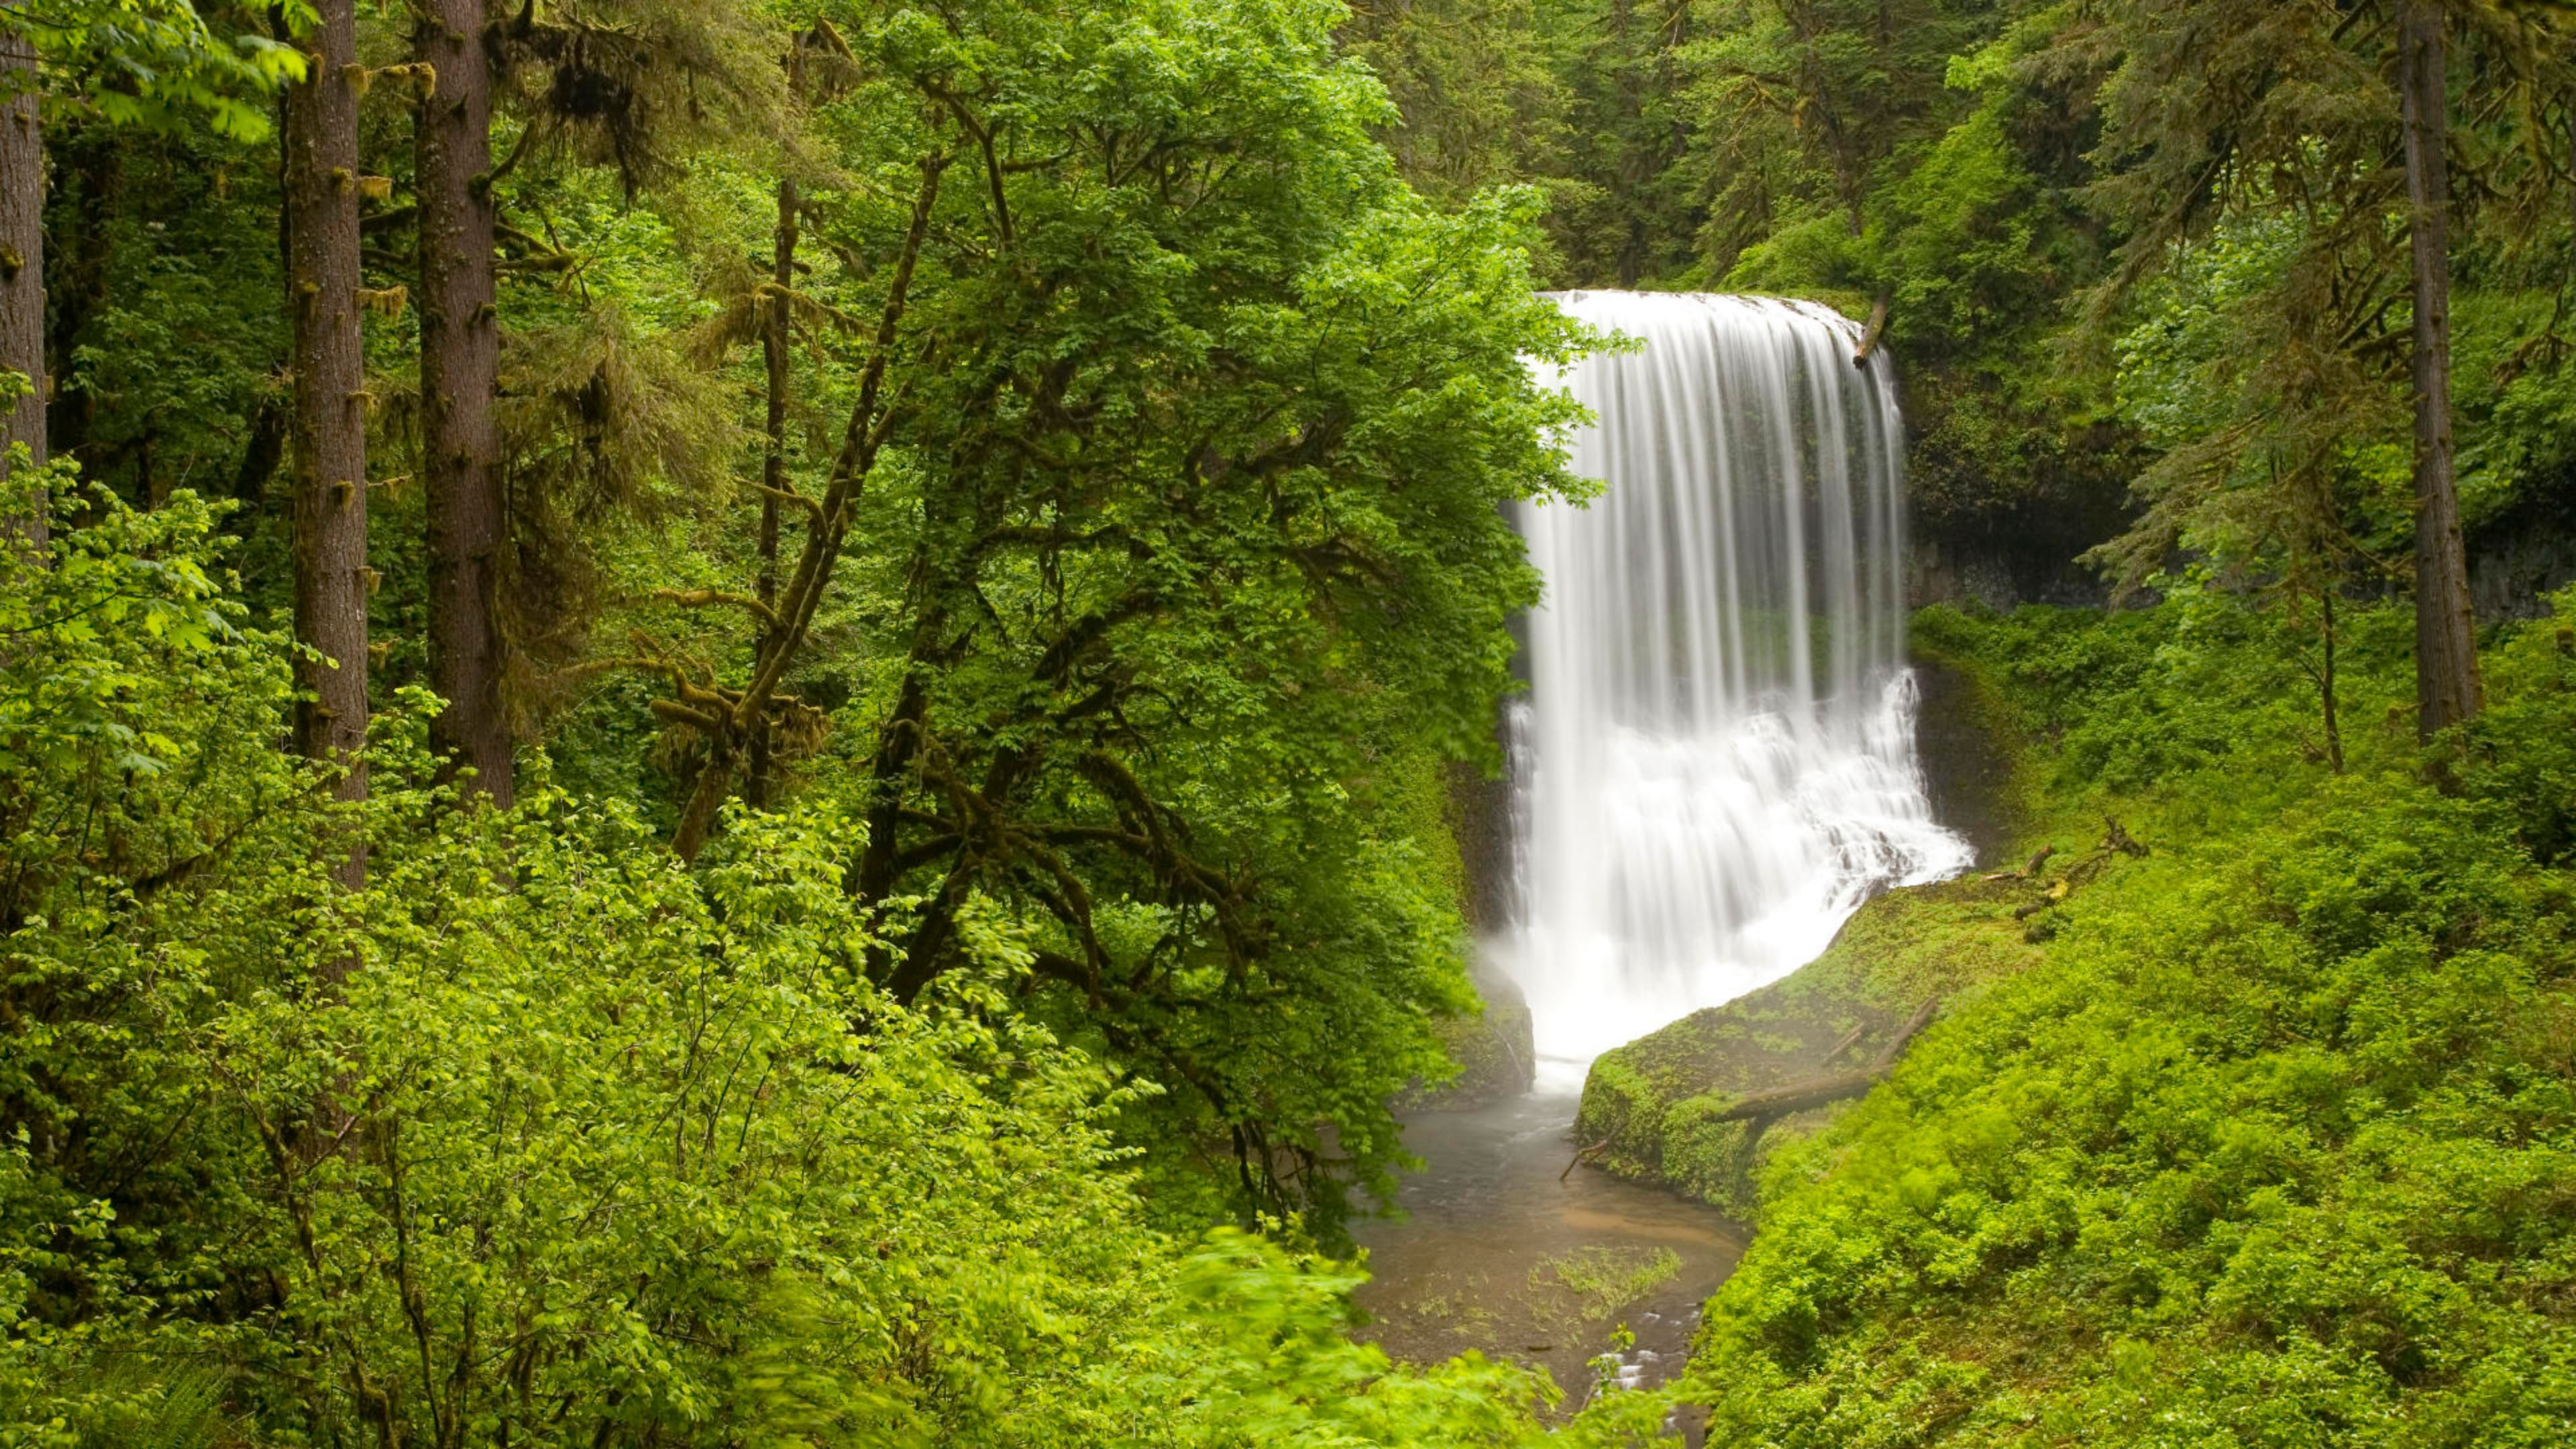 Spring Landscape Nature Waterfall Forest With Green Trees Oregon State Usa Spring 4k Wallpaper 3840x2160, Wallpaper13.com